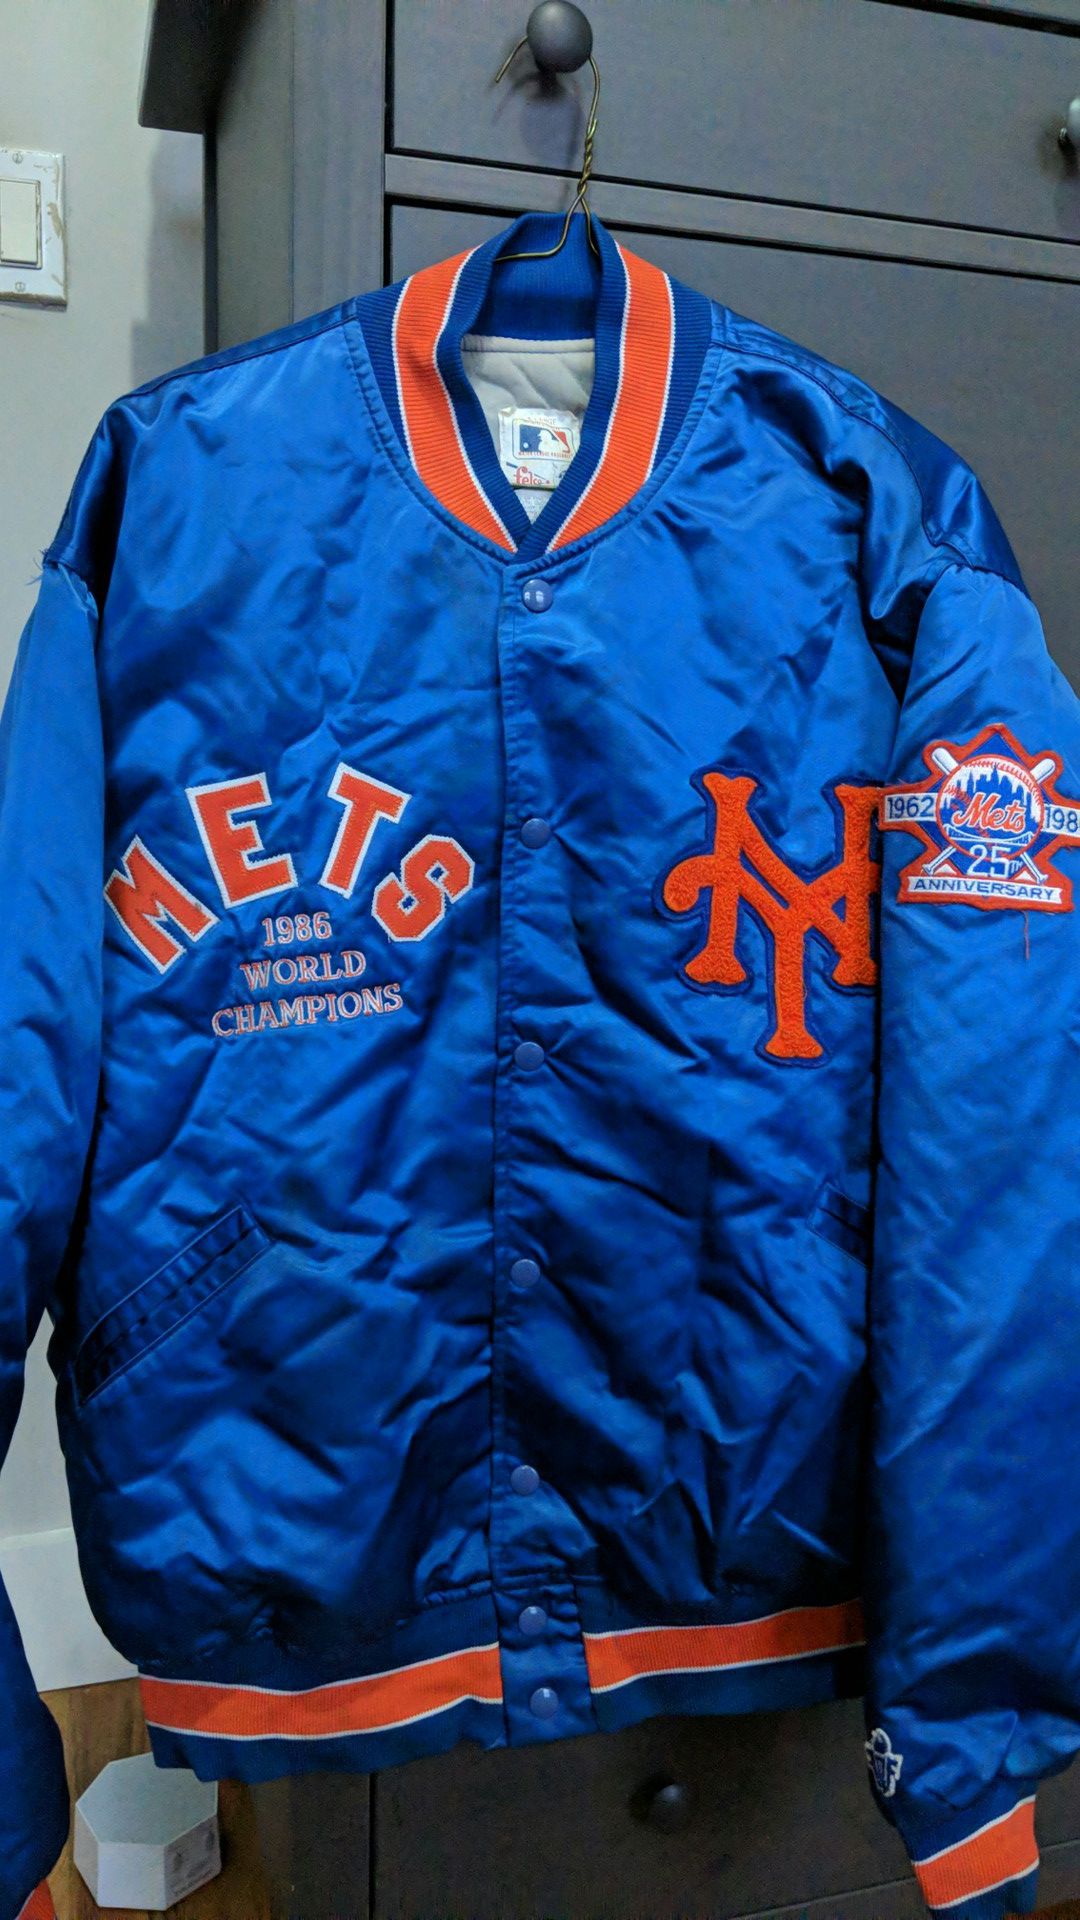 Mets Retro 1986 World Champs Jacket for Sale in Brooklyn, NY